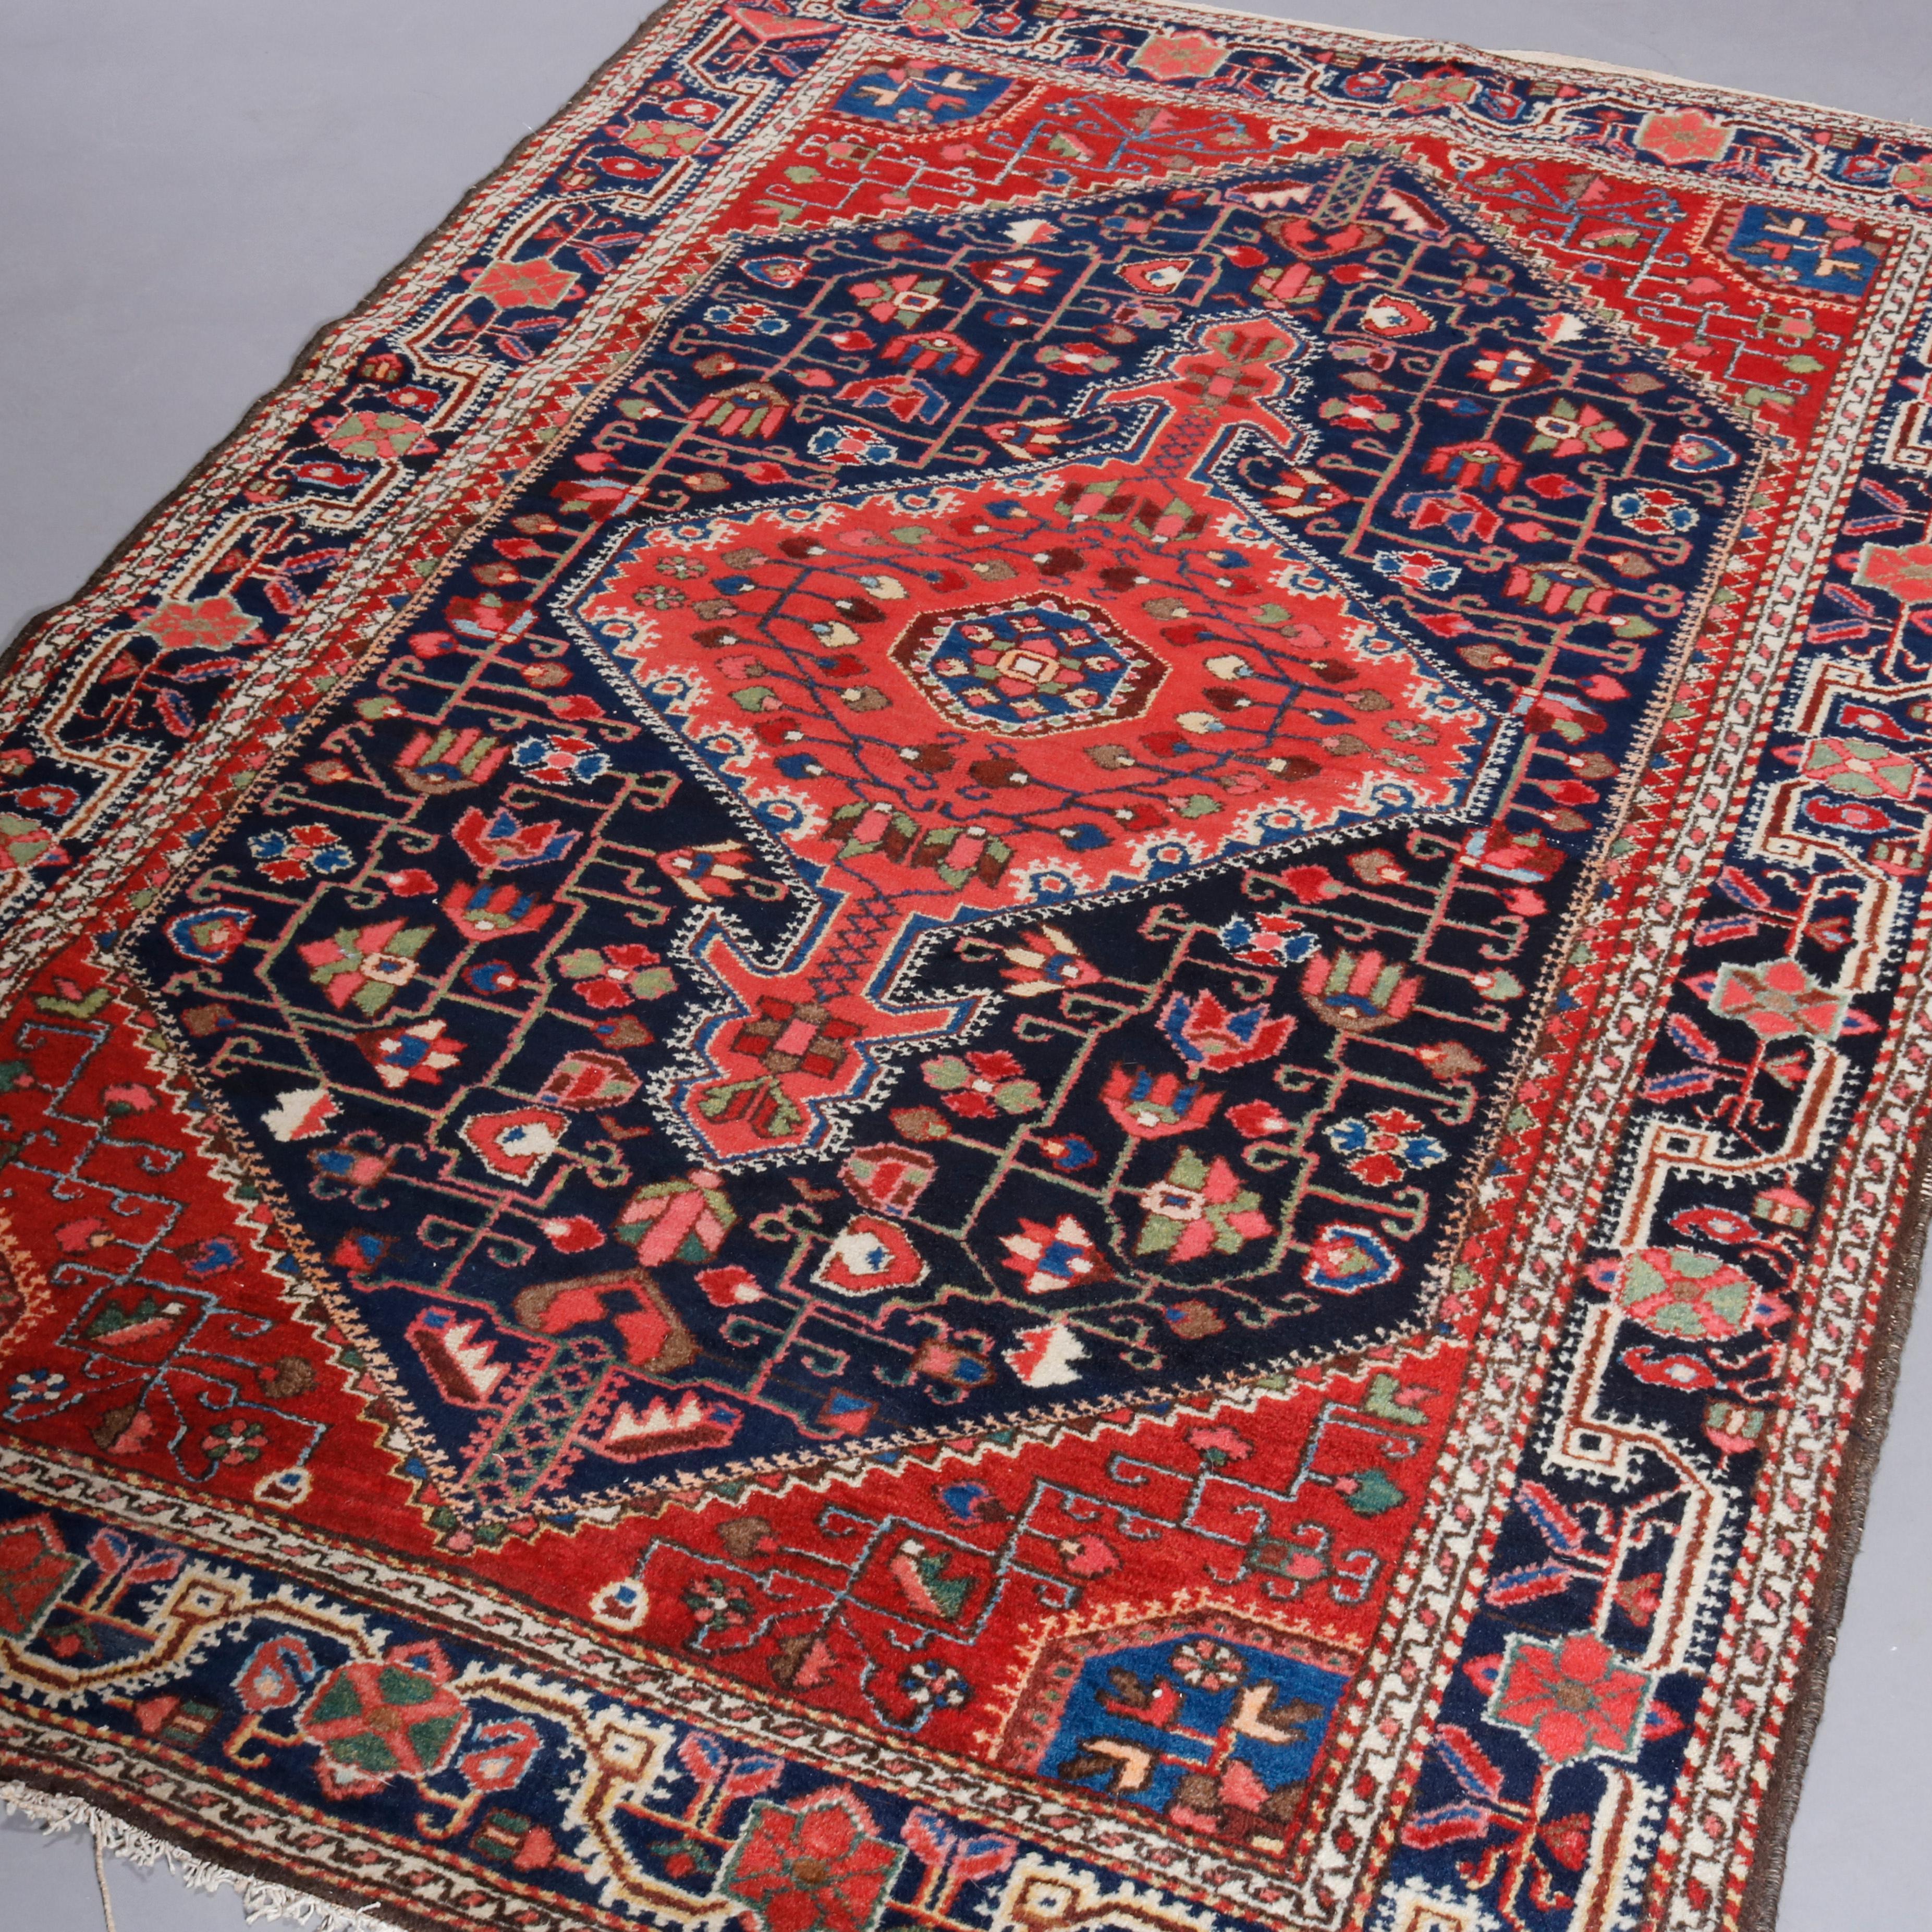 An antique Persian Malayer oriental rug offers wool construction having central geometric medallion and stylized floral elements throughout, c1930

Measures: 78.25